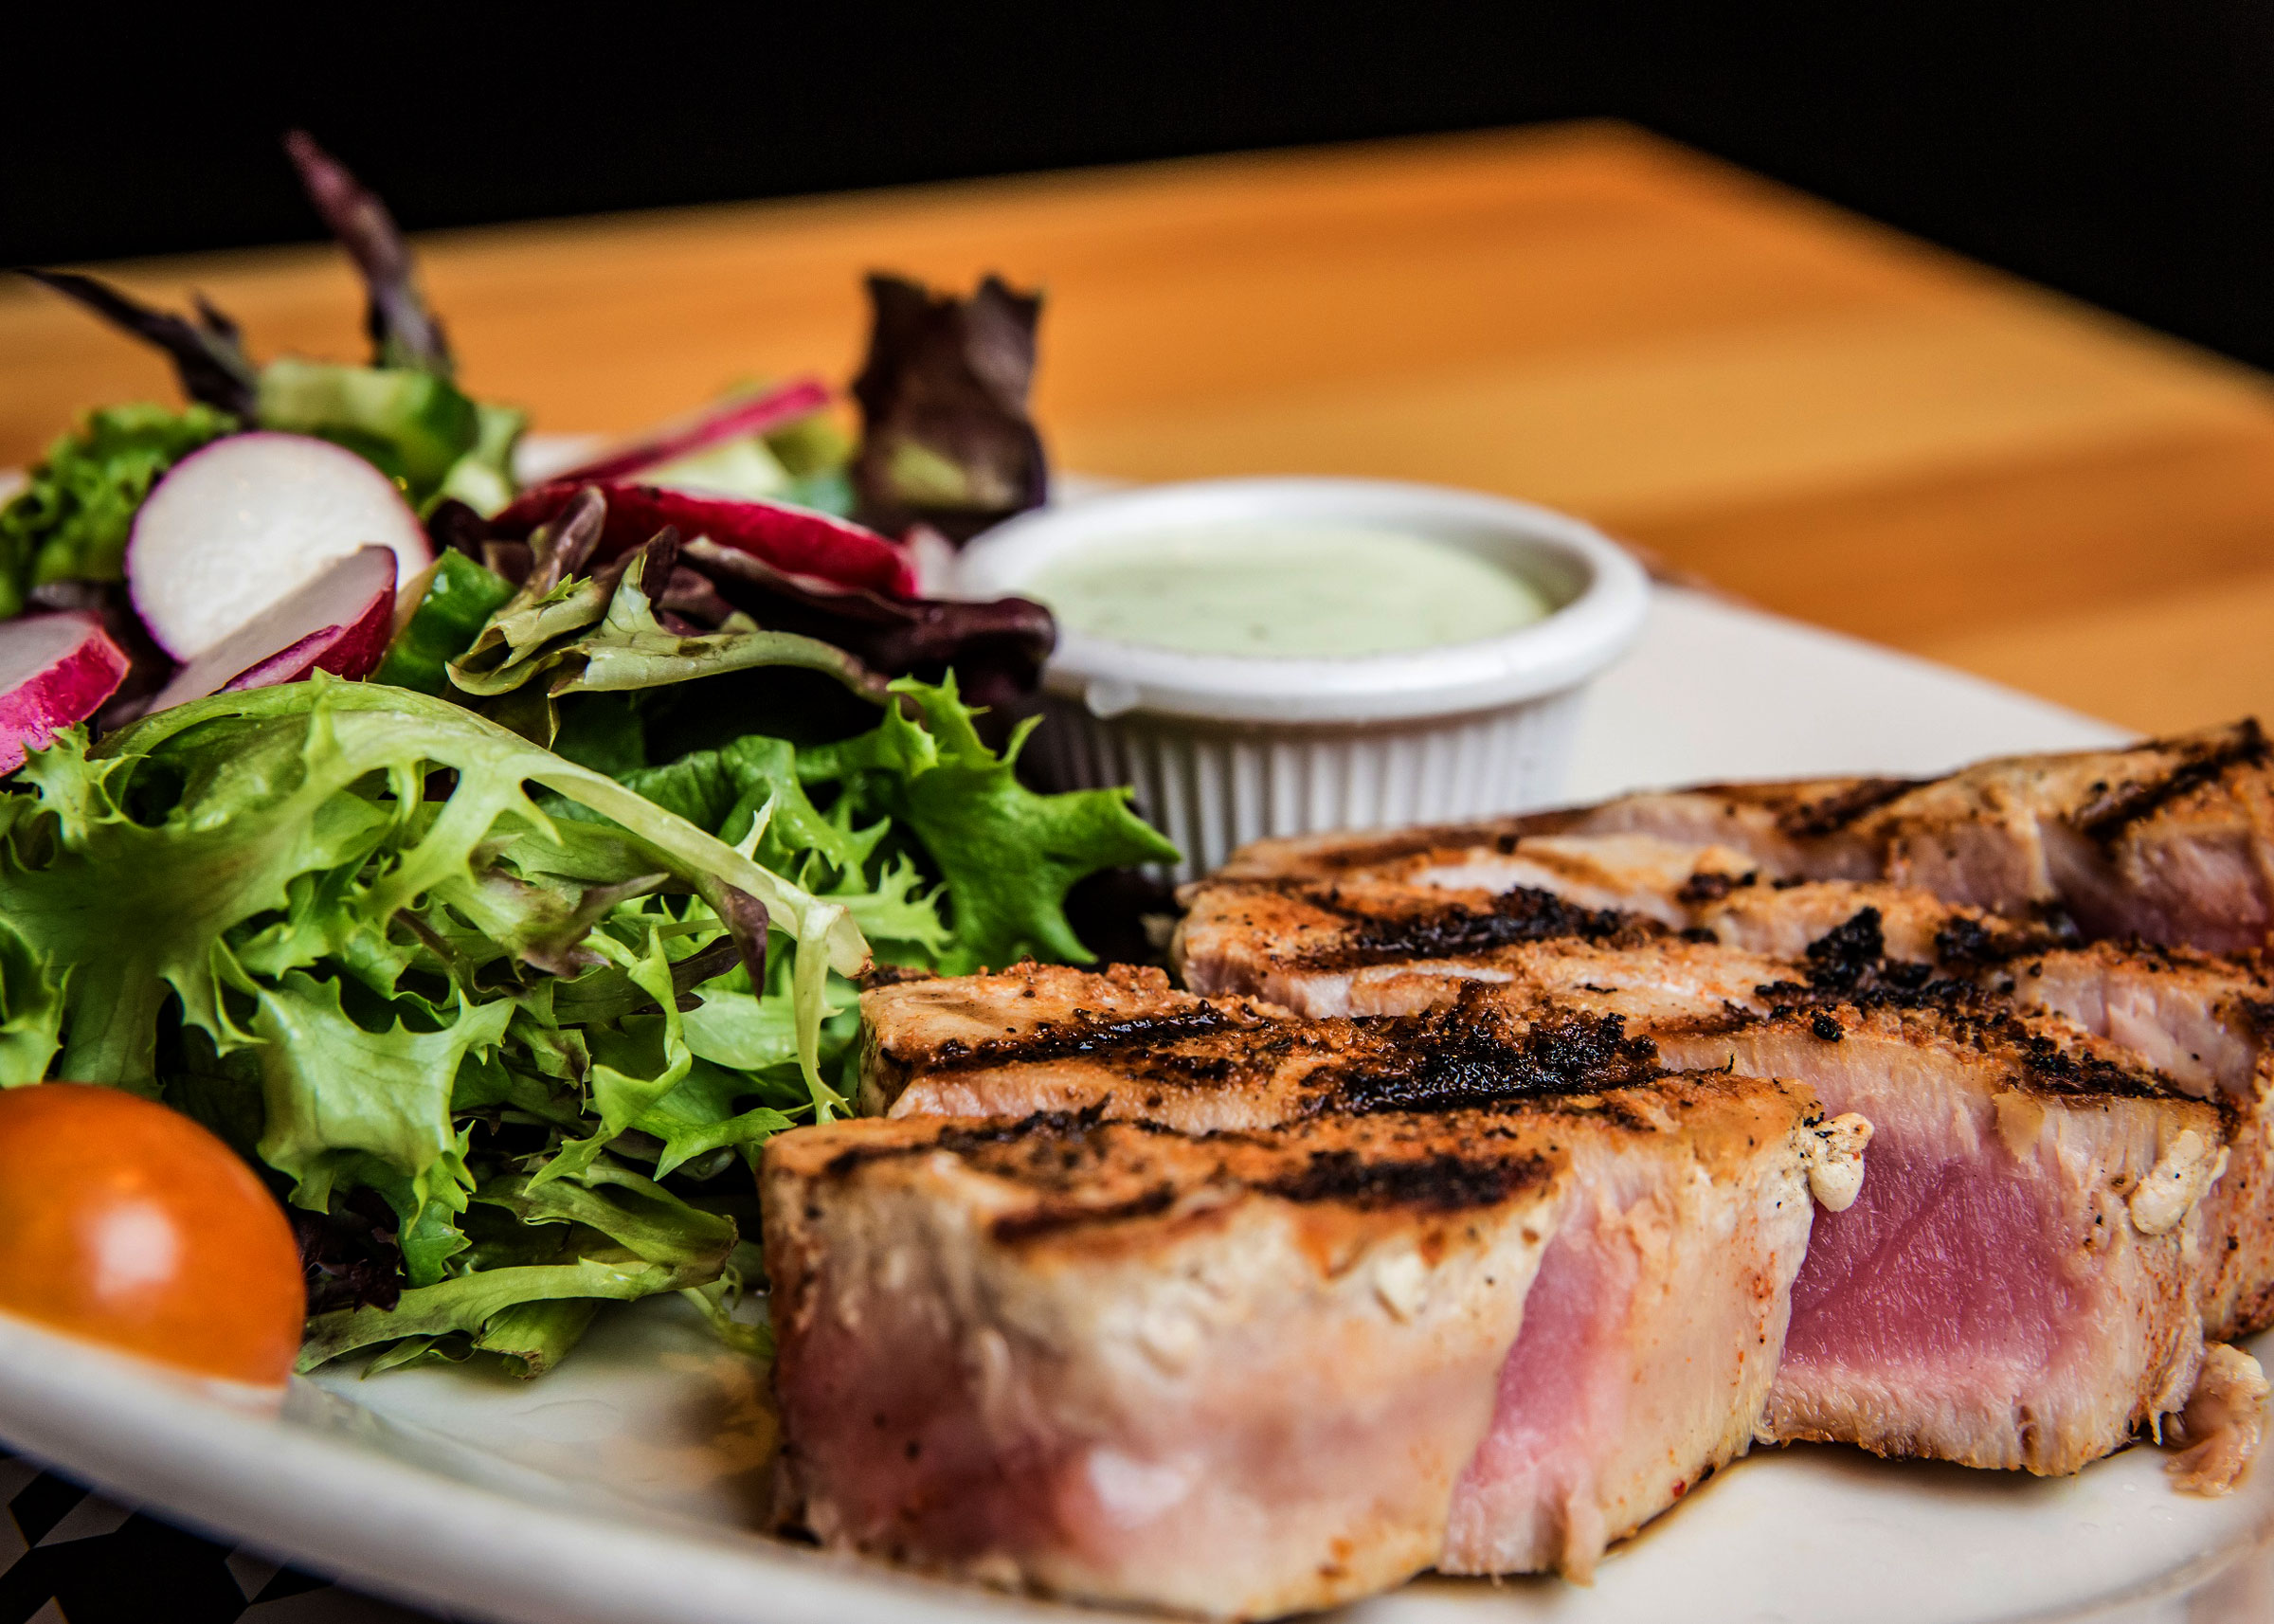 Grilled Tuna Steak with a side salad